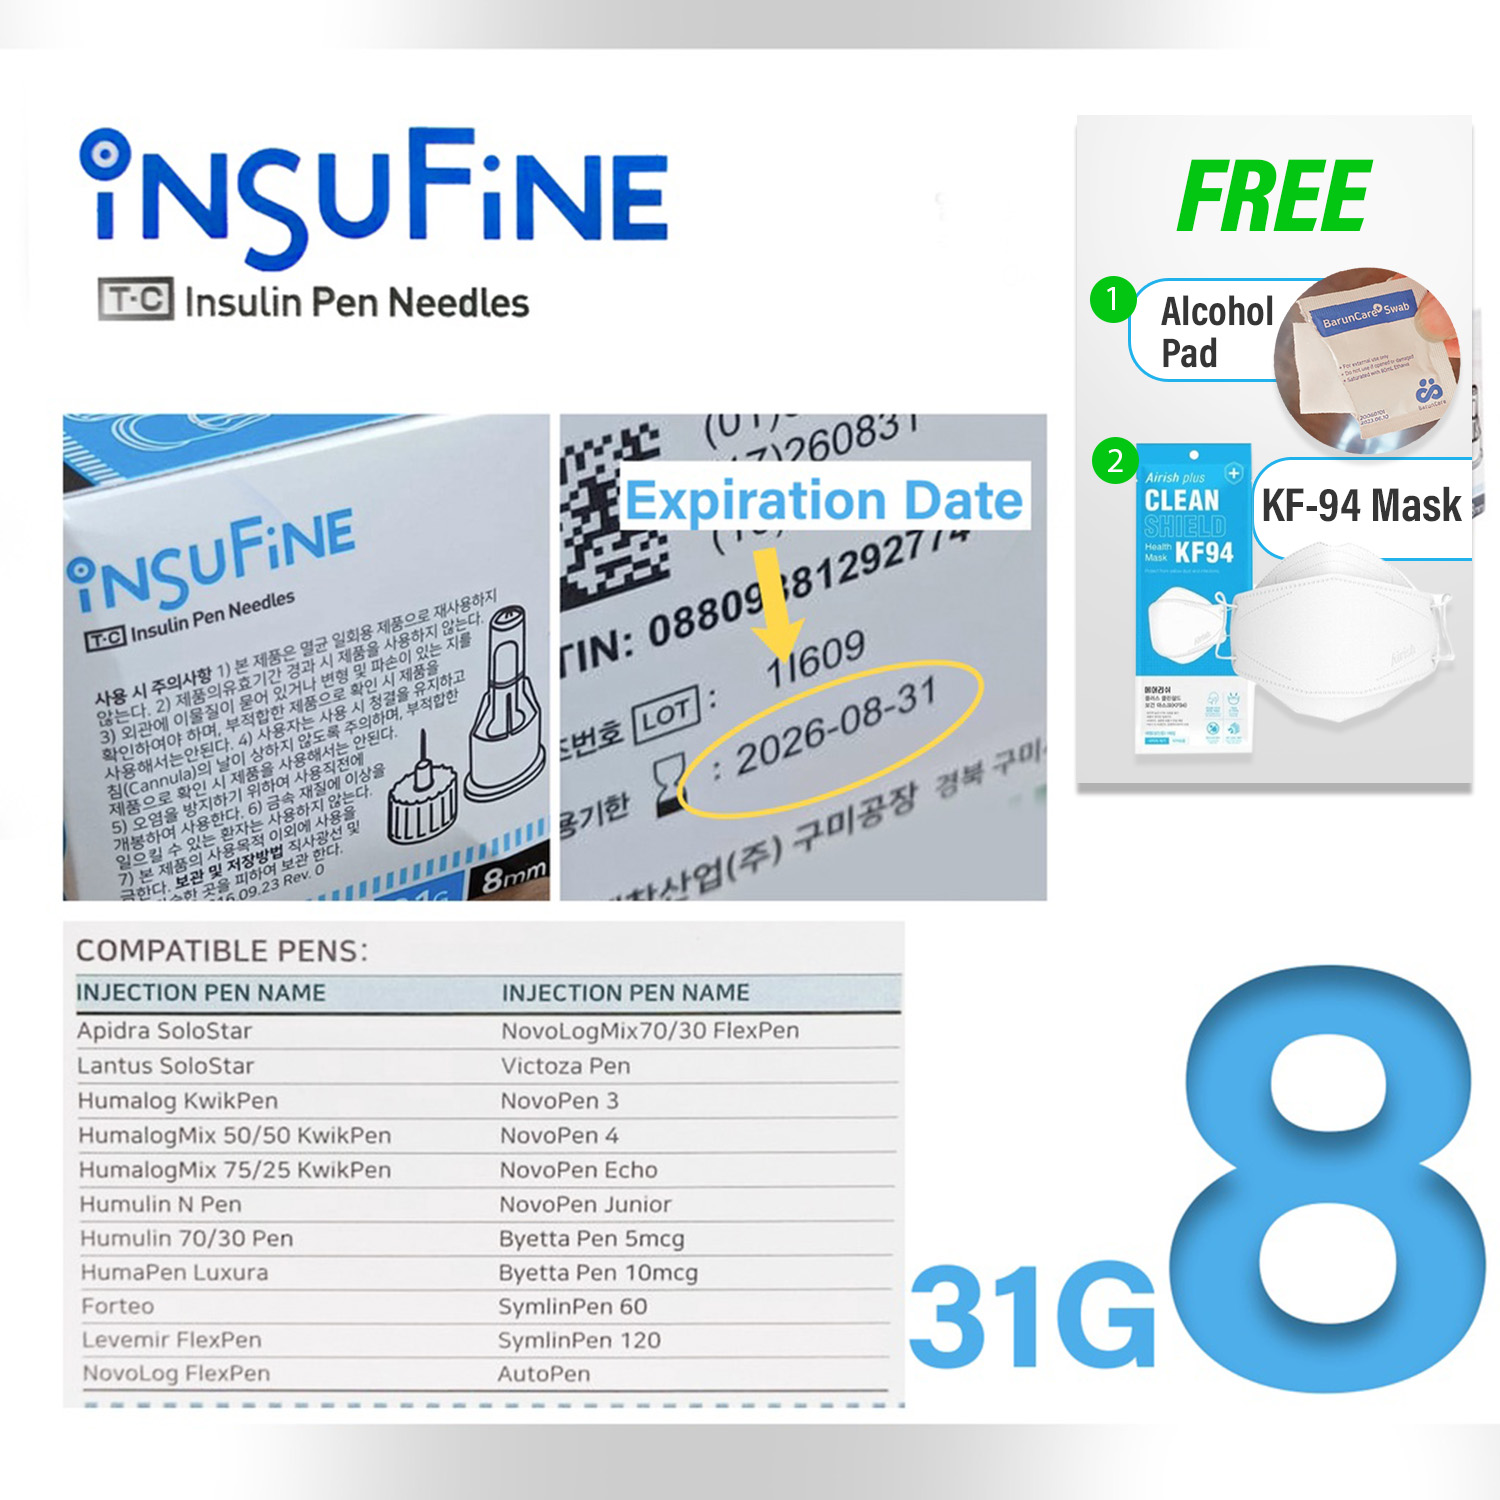 Shop Novofine Plus 32g Insulin Needle 4mm with great discounts and